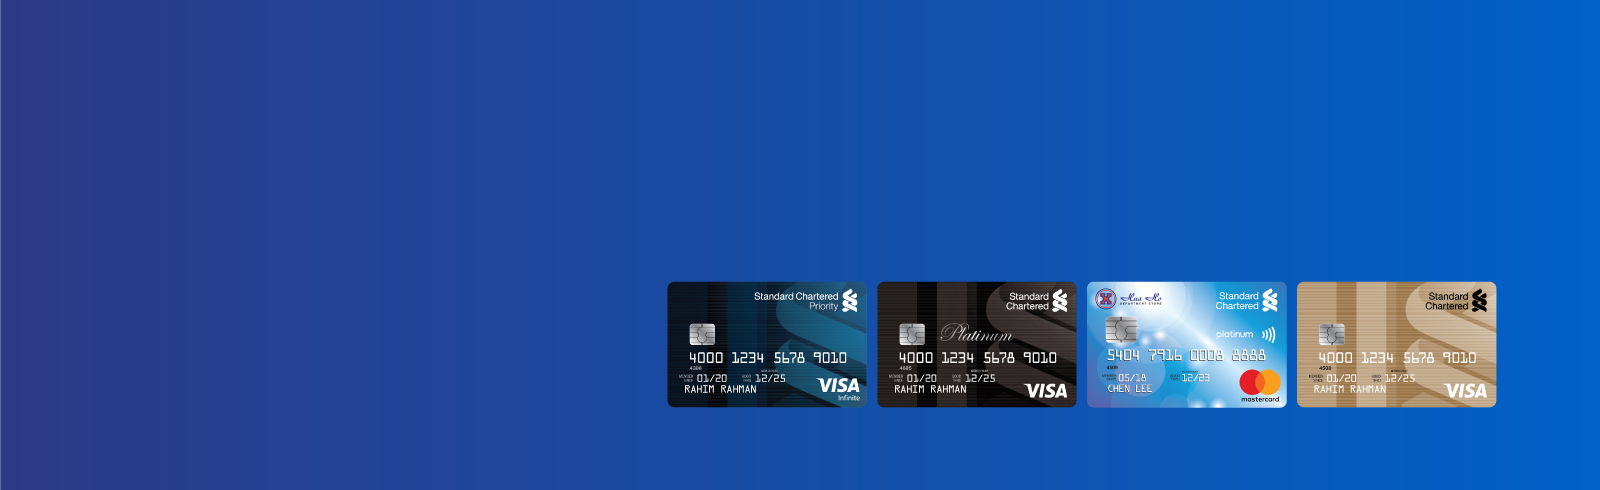 year-end-credit-card-spend_cta-banner